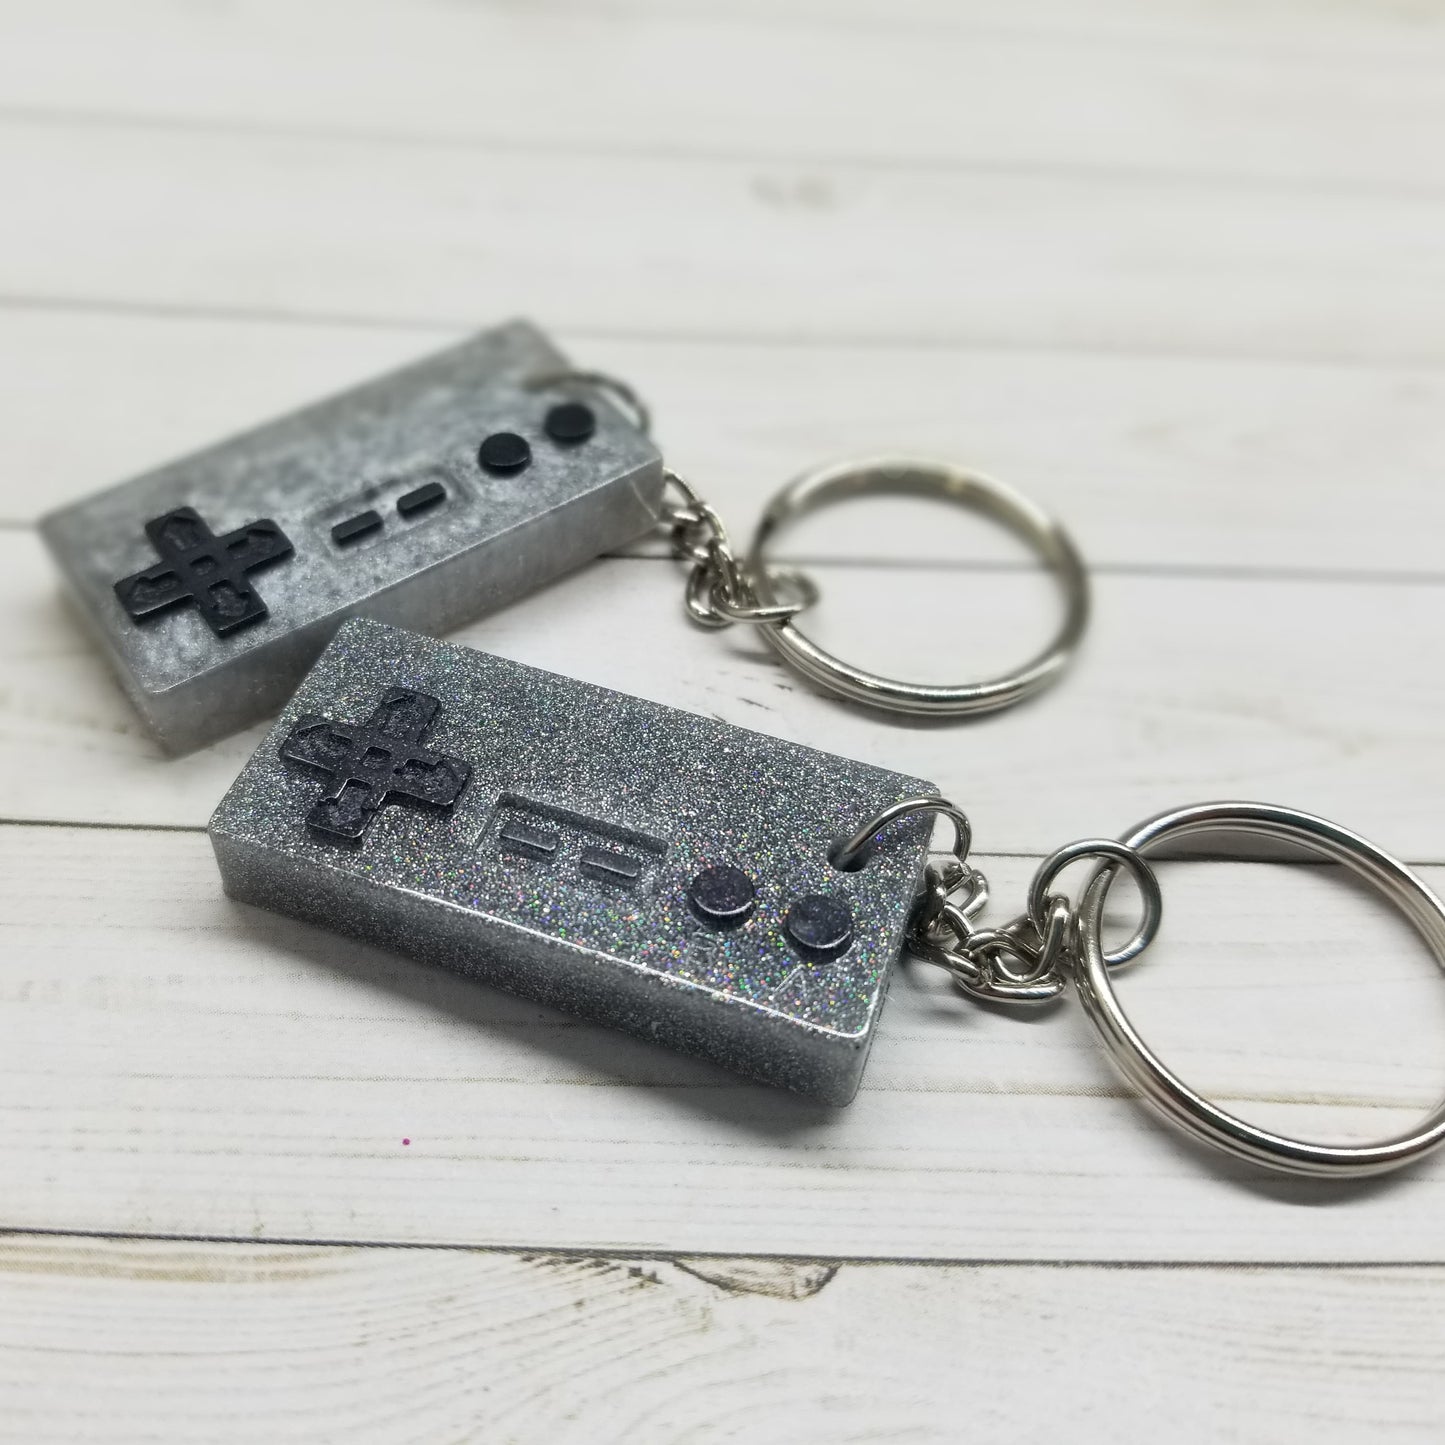 Game Controller Resin Keychain